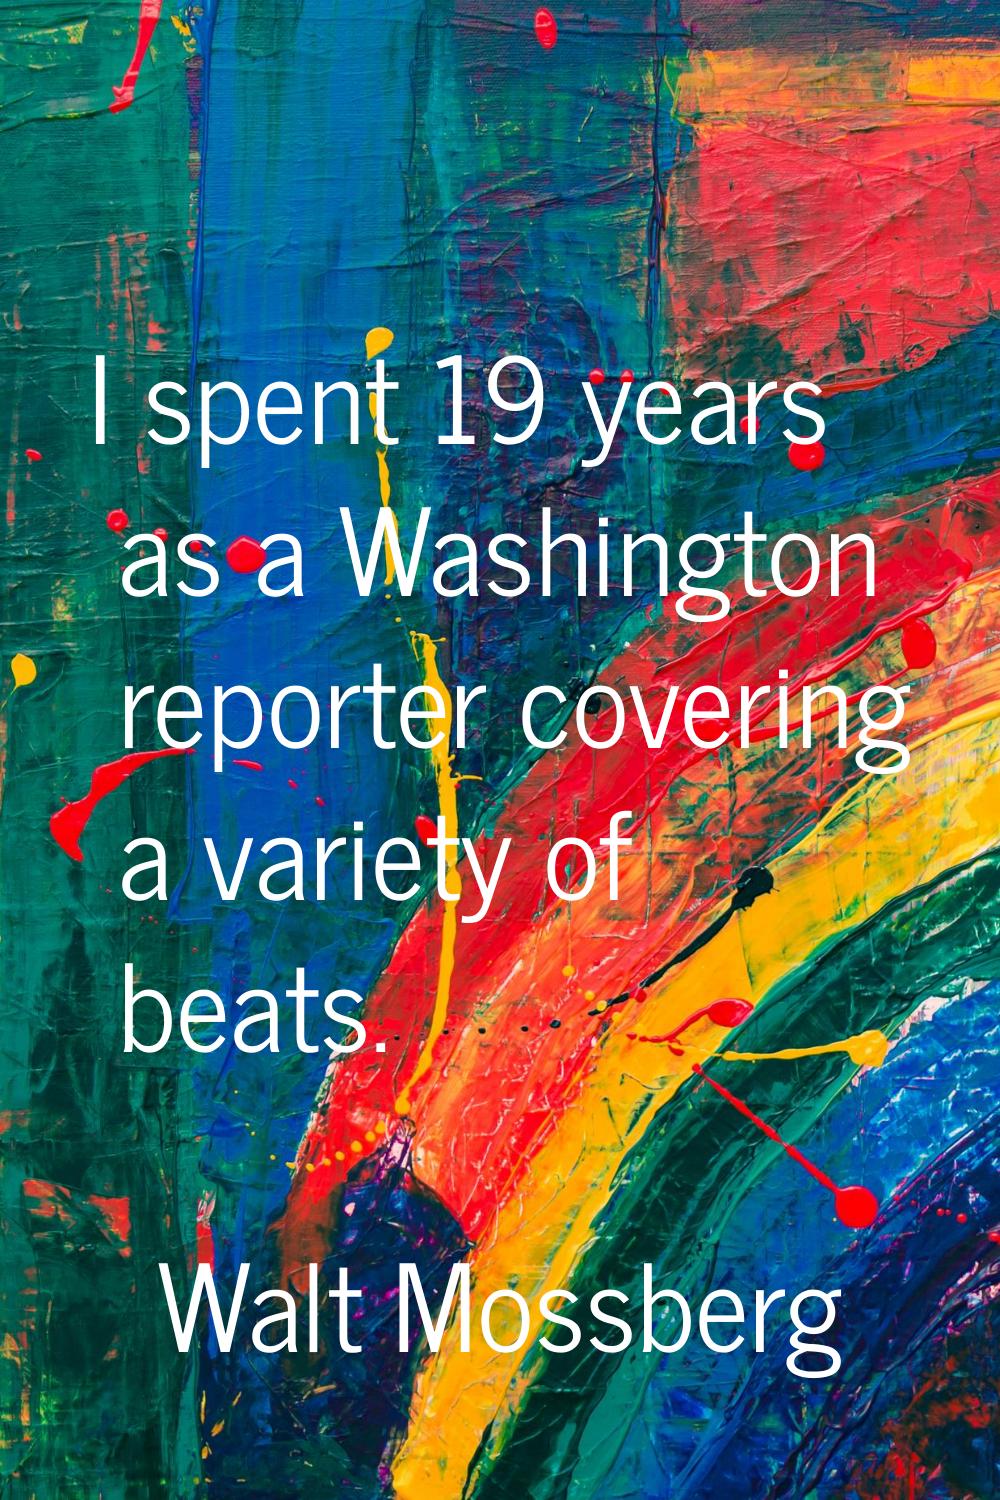 I spent 19 years as a Washington reporter covering a variety of beats.